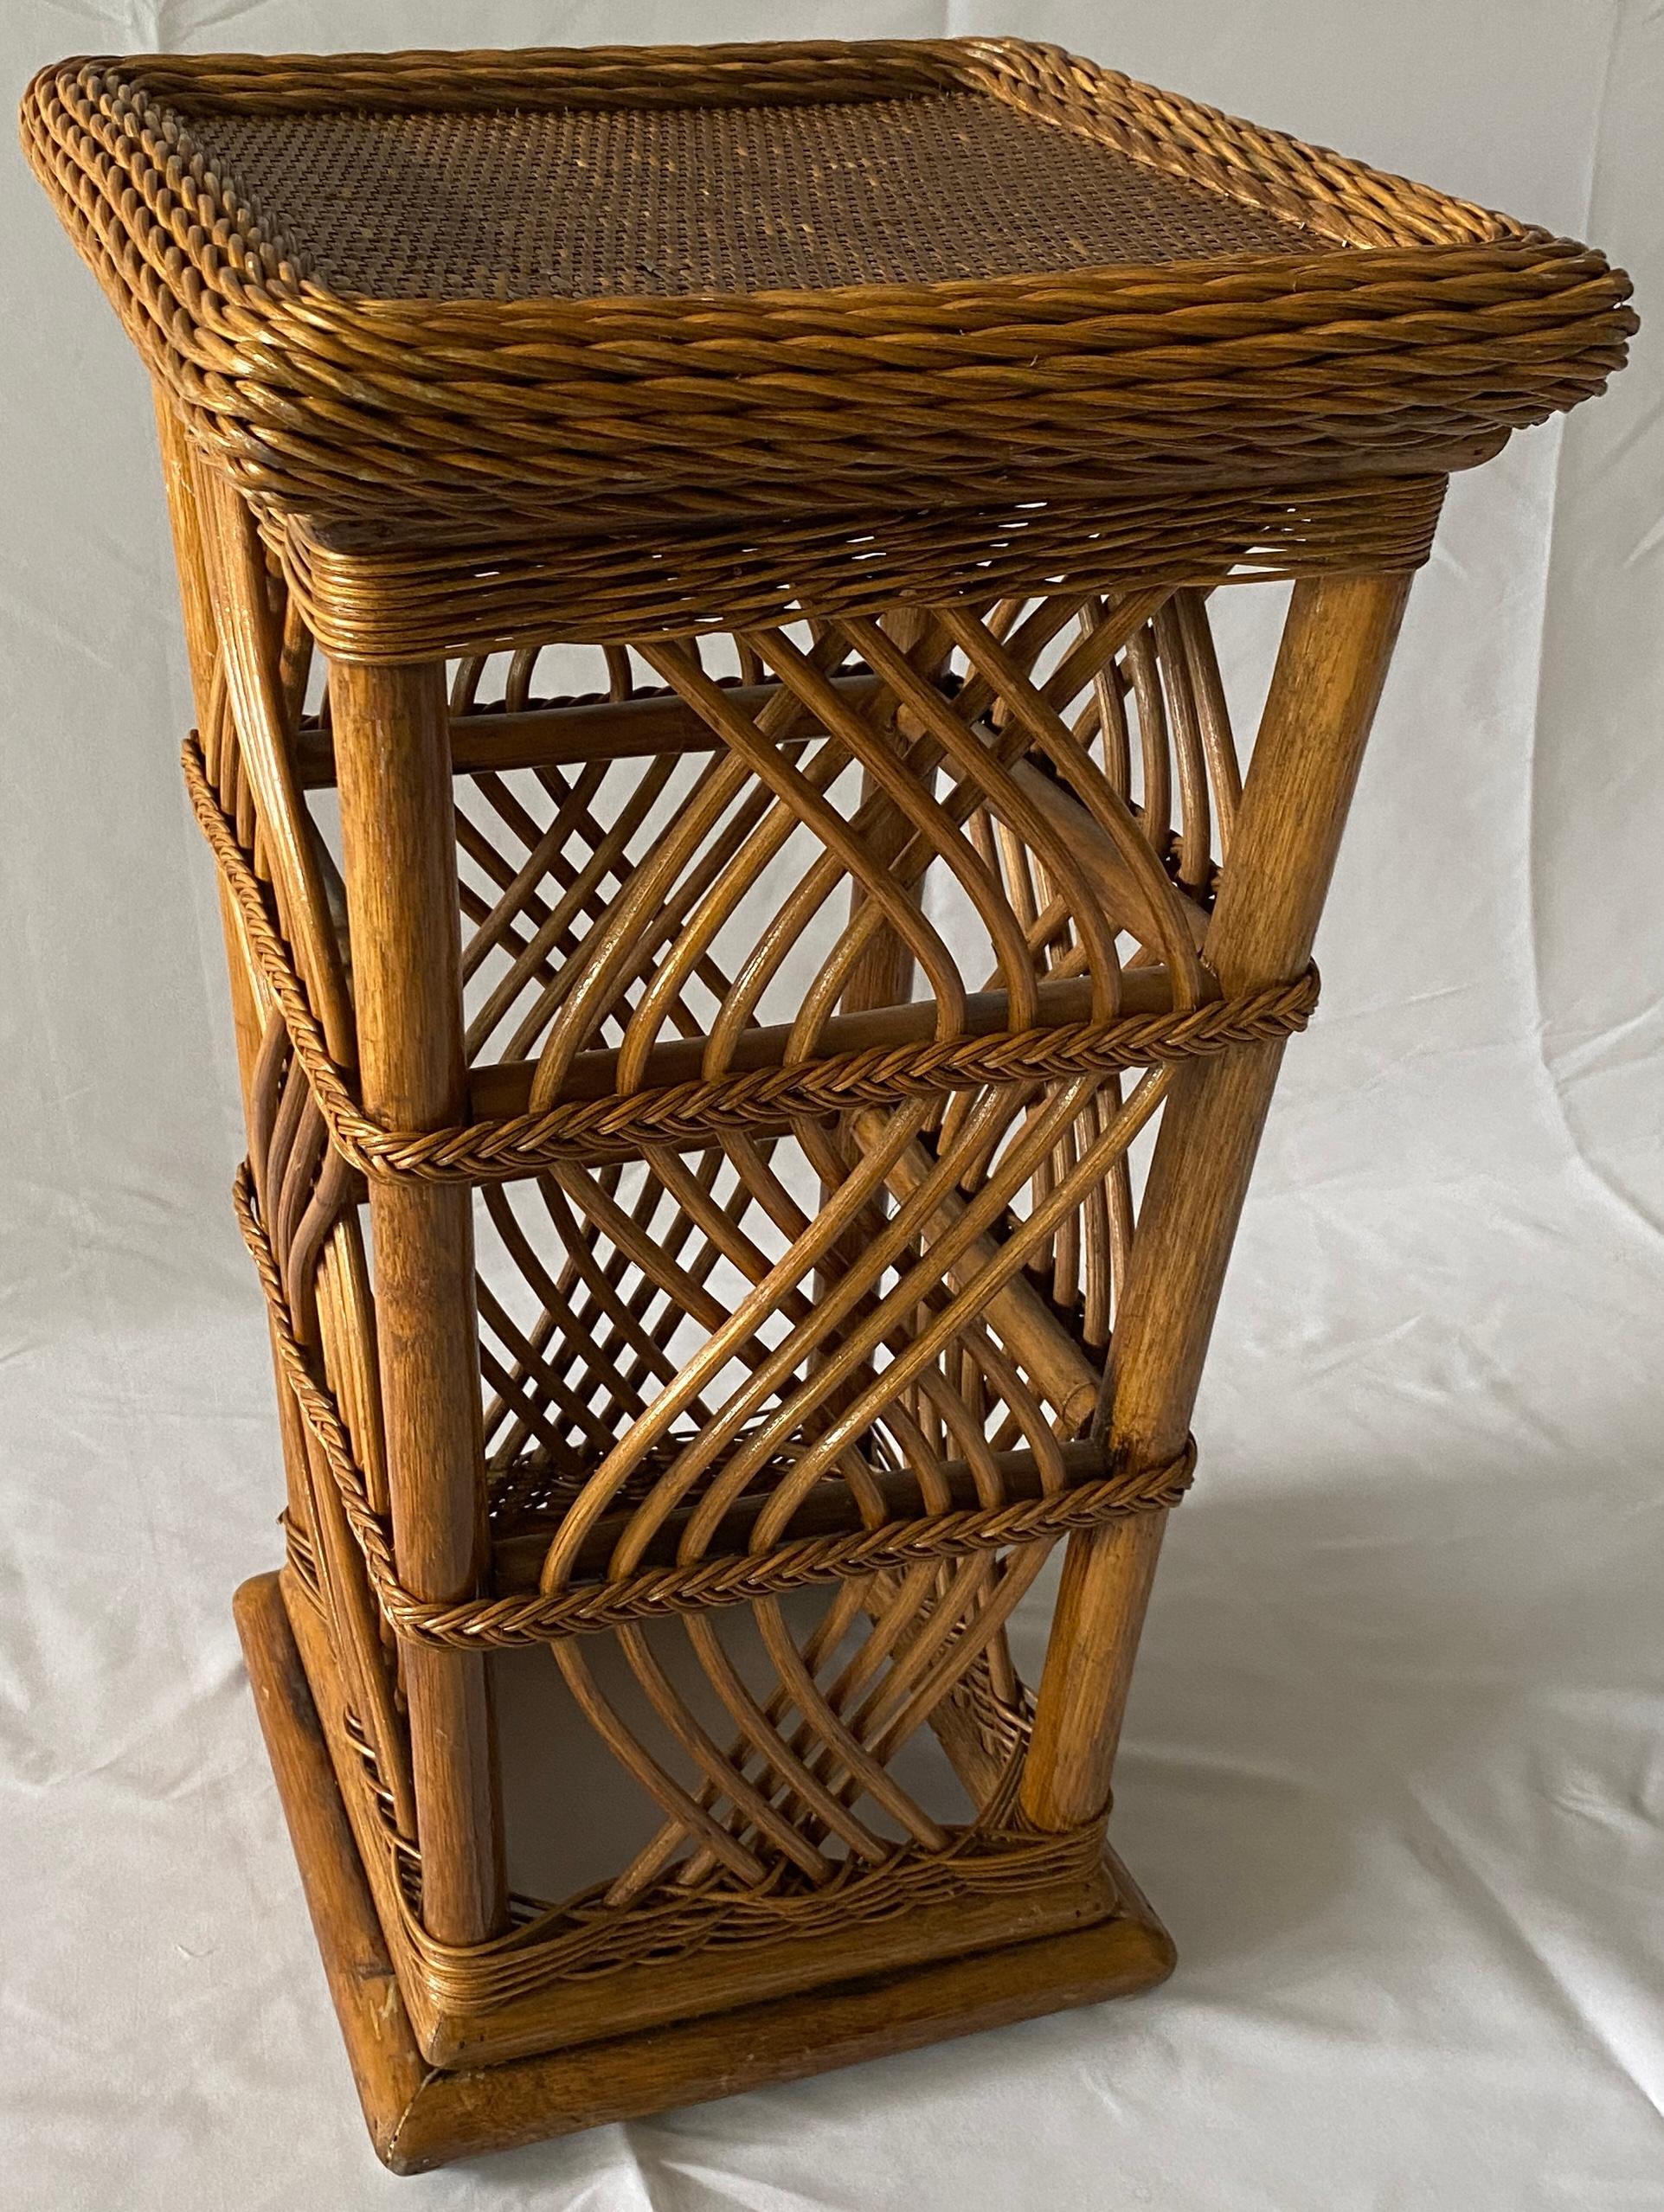 A good quality square bamboo and rattan end table or side table. Interesting and stylish frame. Made from imported bamboo this end table is a wonderful example American island flair design. 

Will enhance any contemporary, mid-century or modern